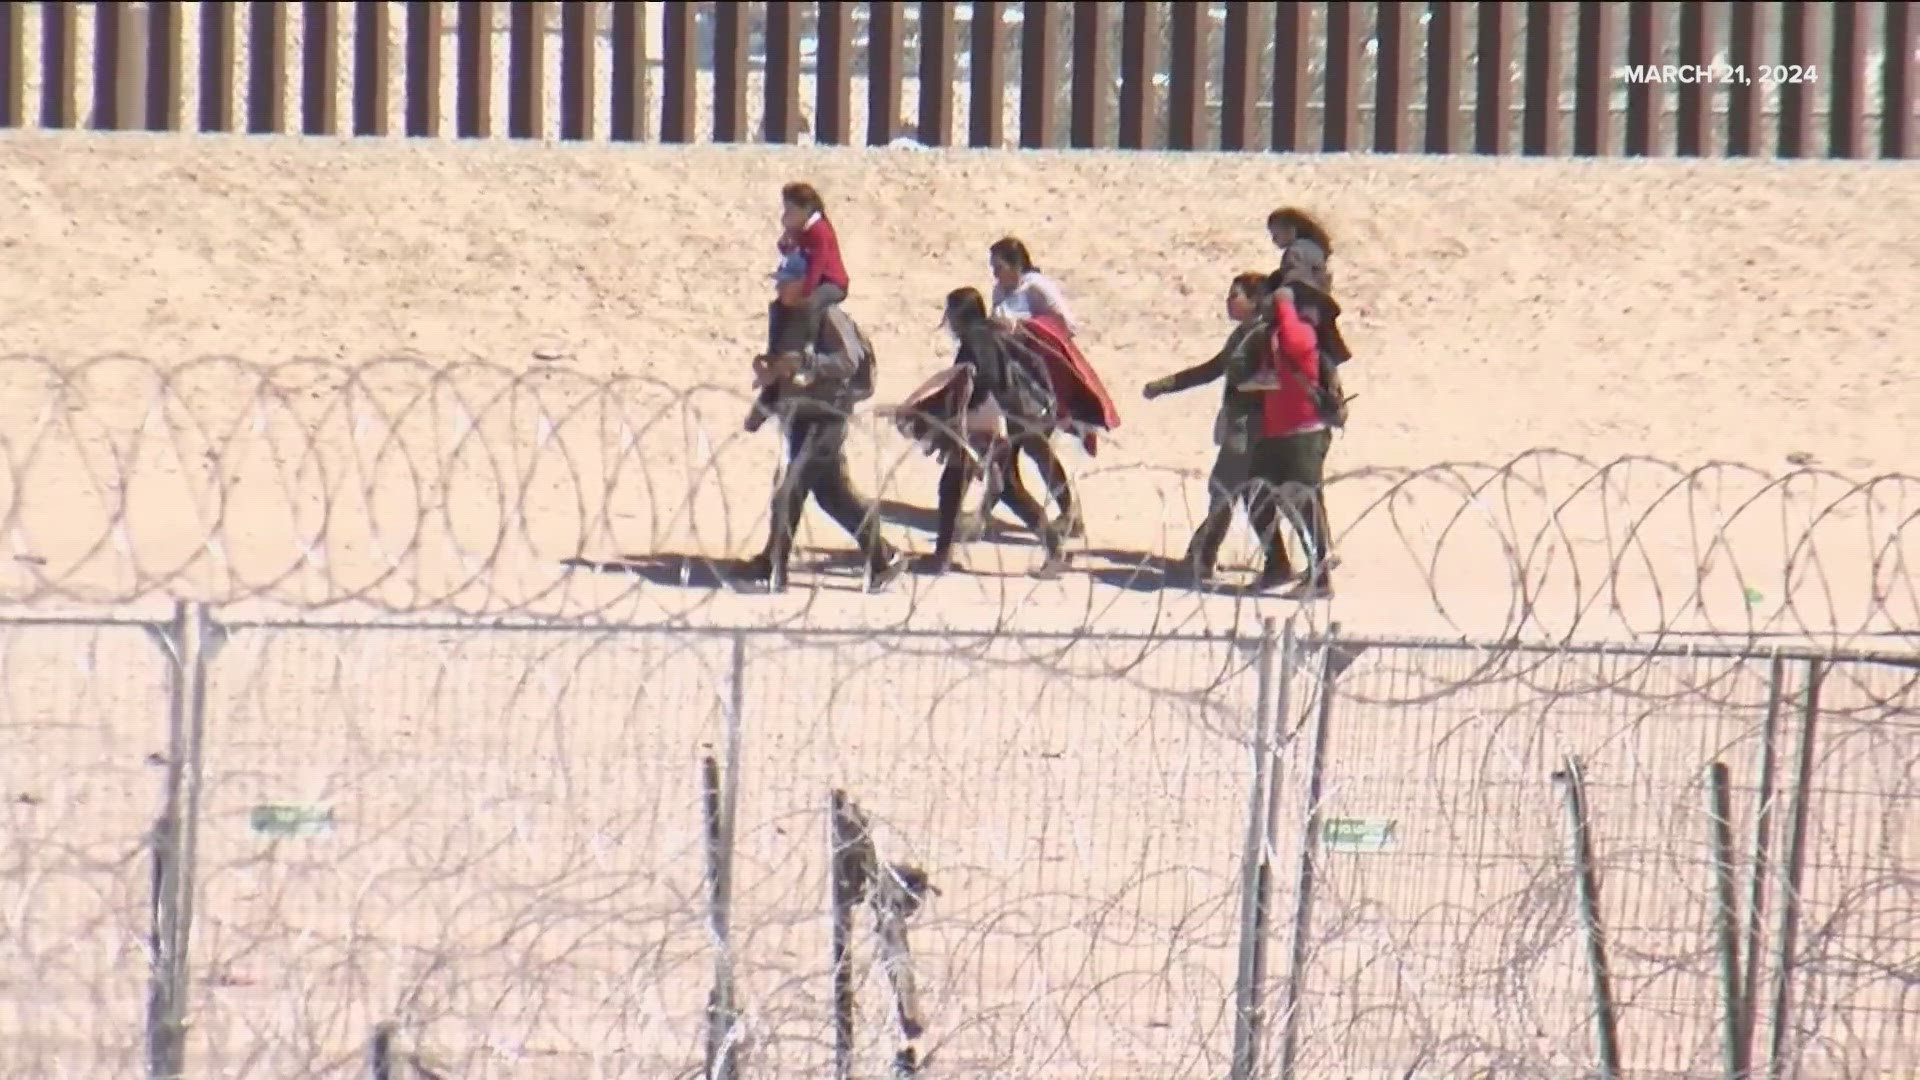 The migrants were arrested approximately two weeks ago in El Paso and despite a judge's attempt to release them, they remain in custody.